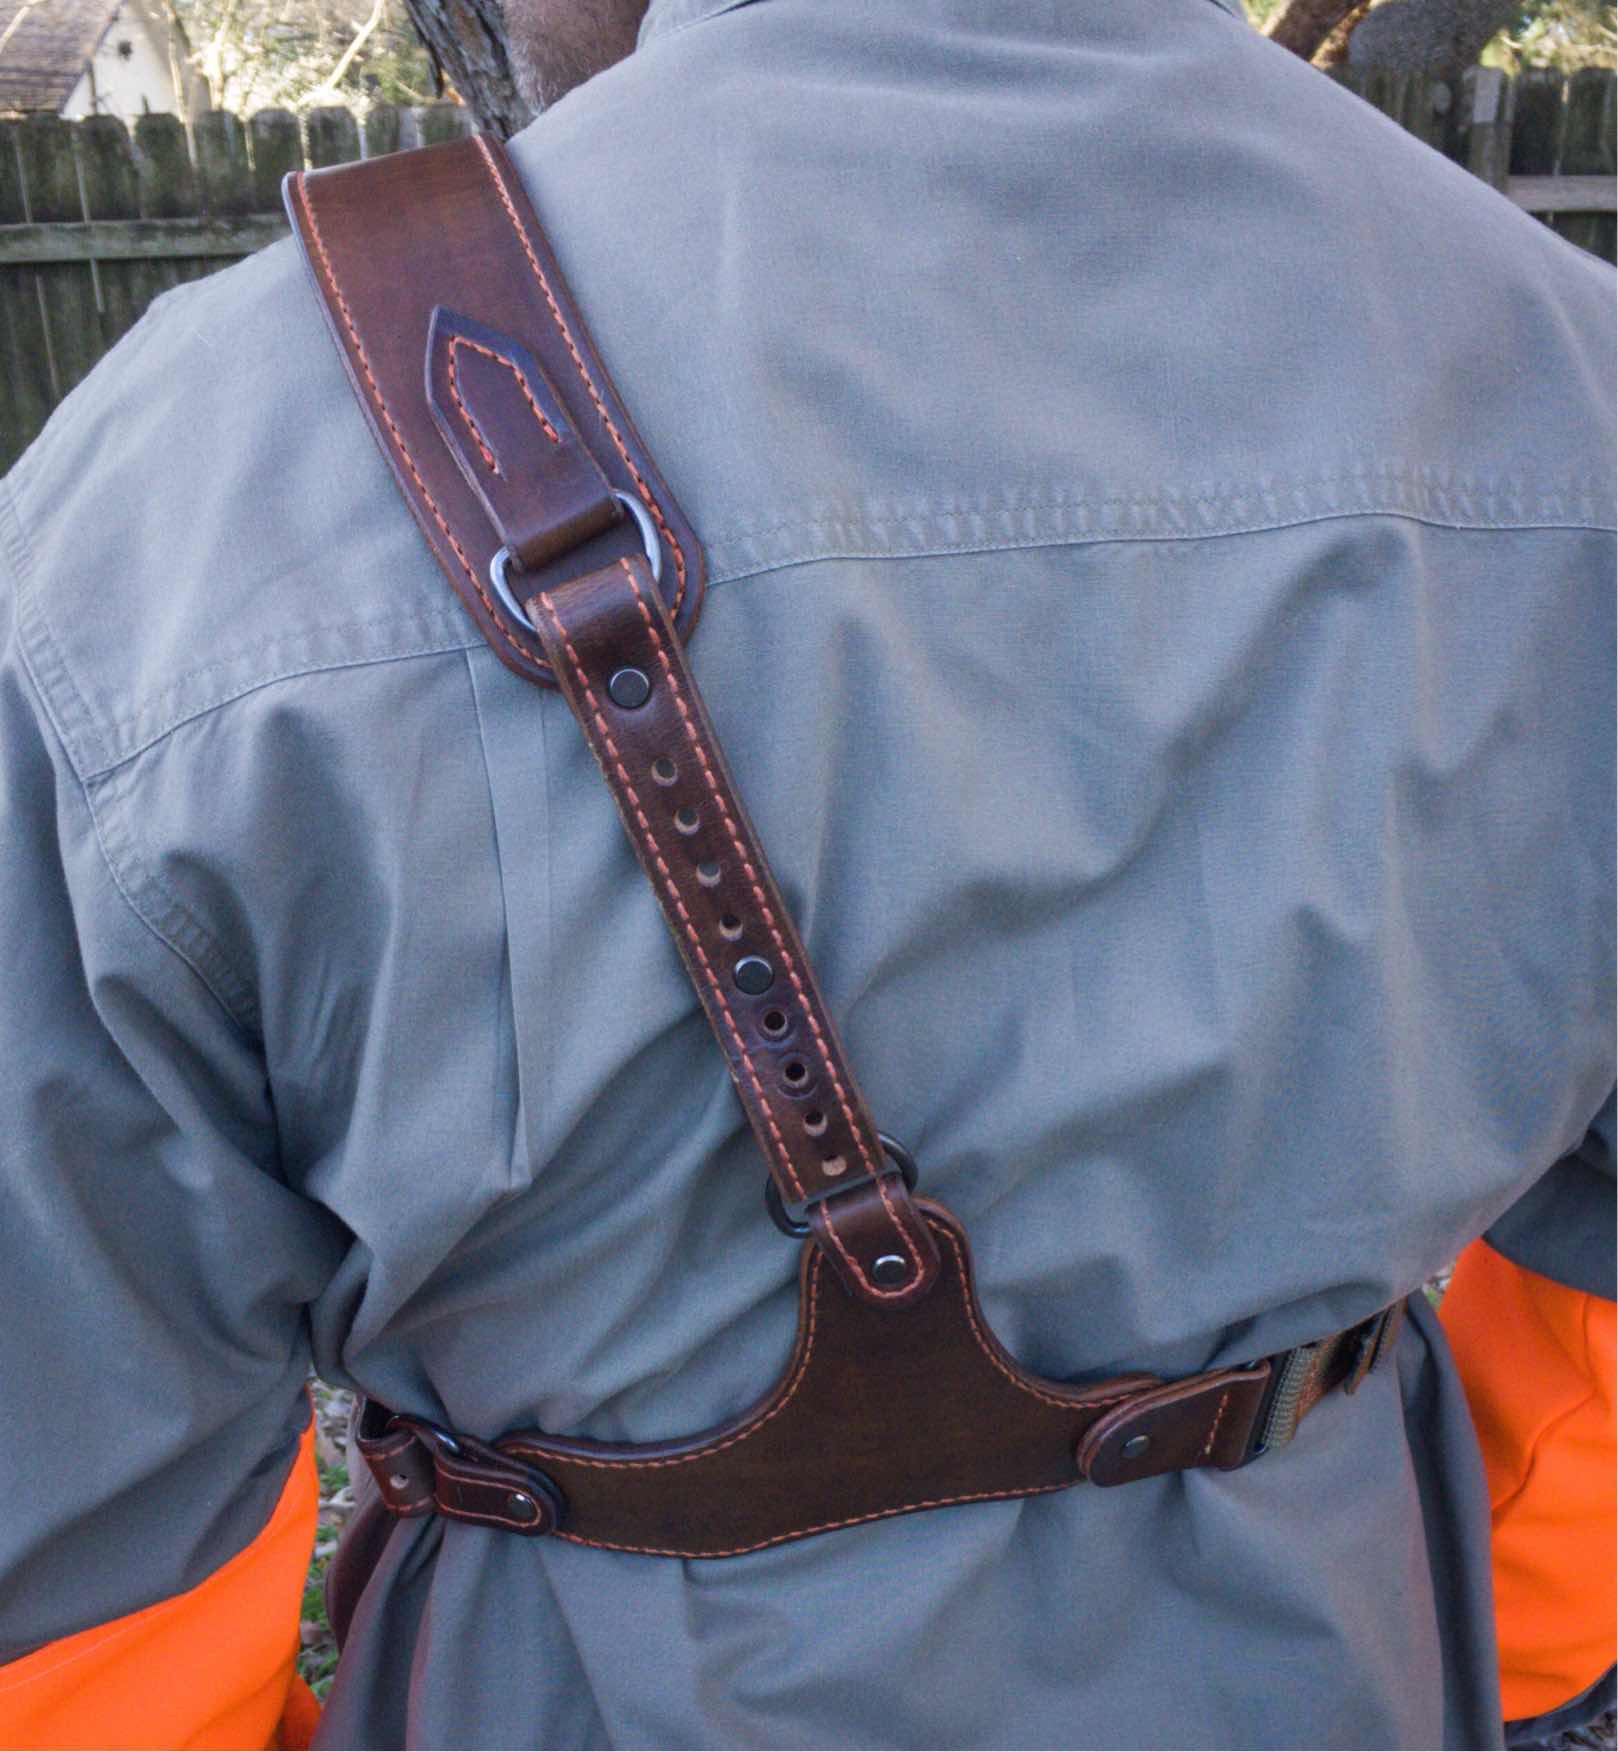 Custom chest holster for rhino 60ds - Gun Holsters, Rifle Slings and ...